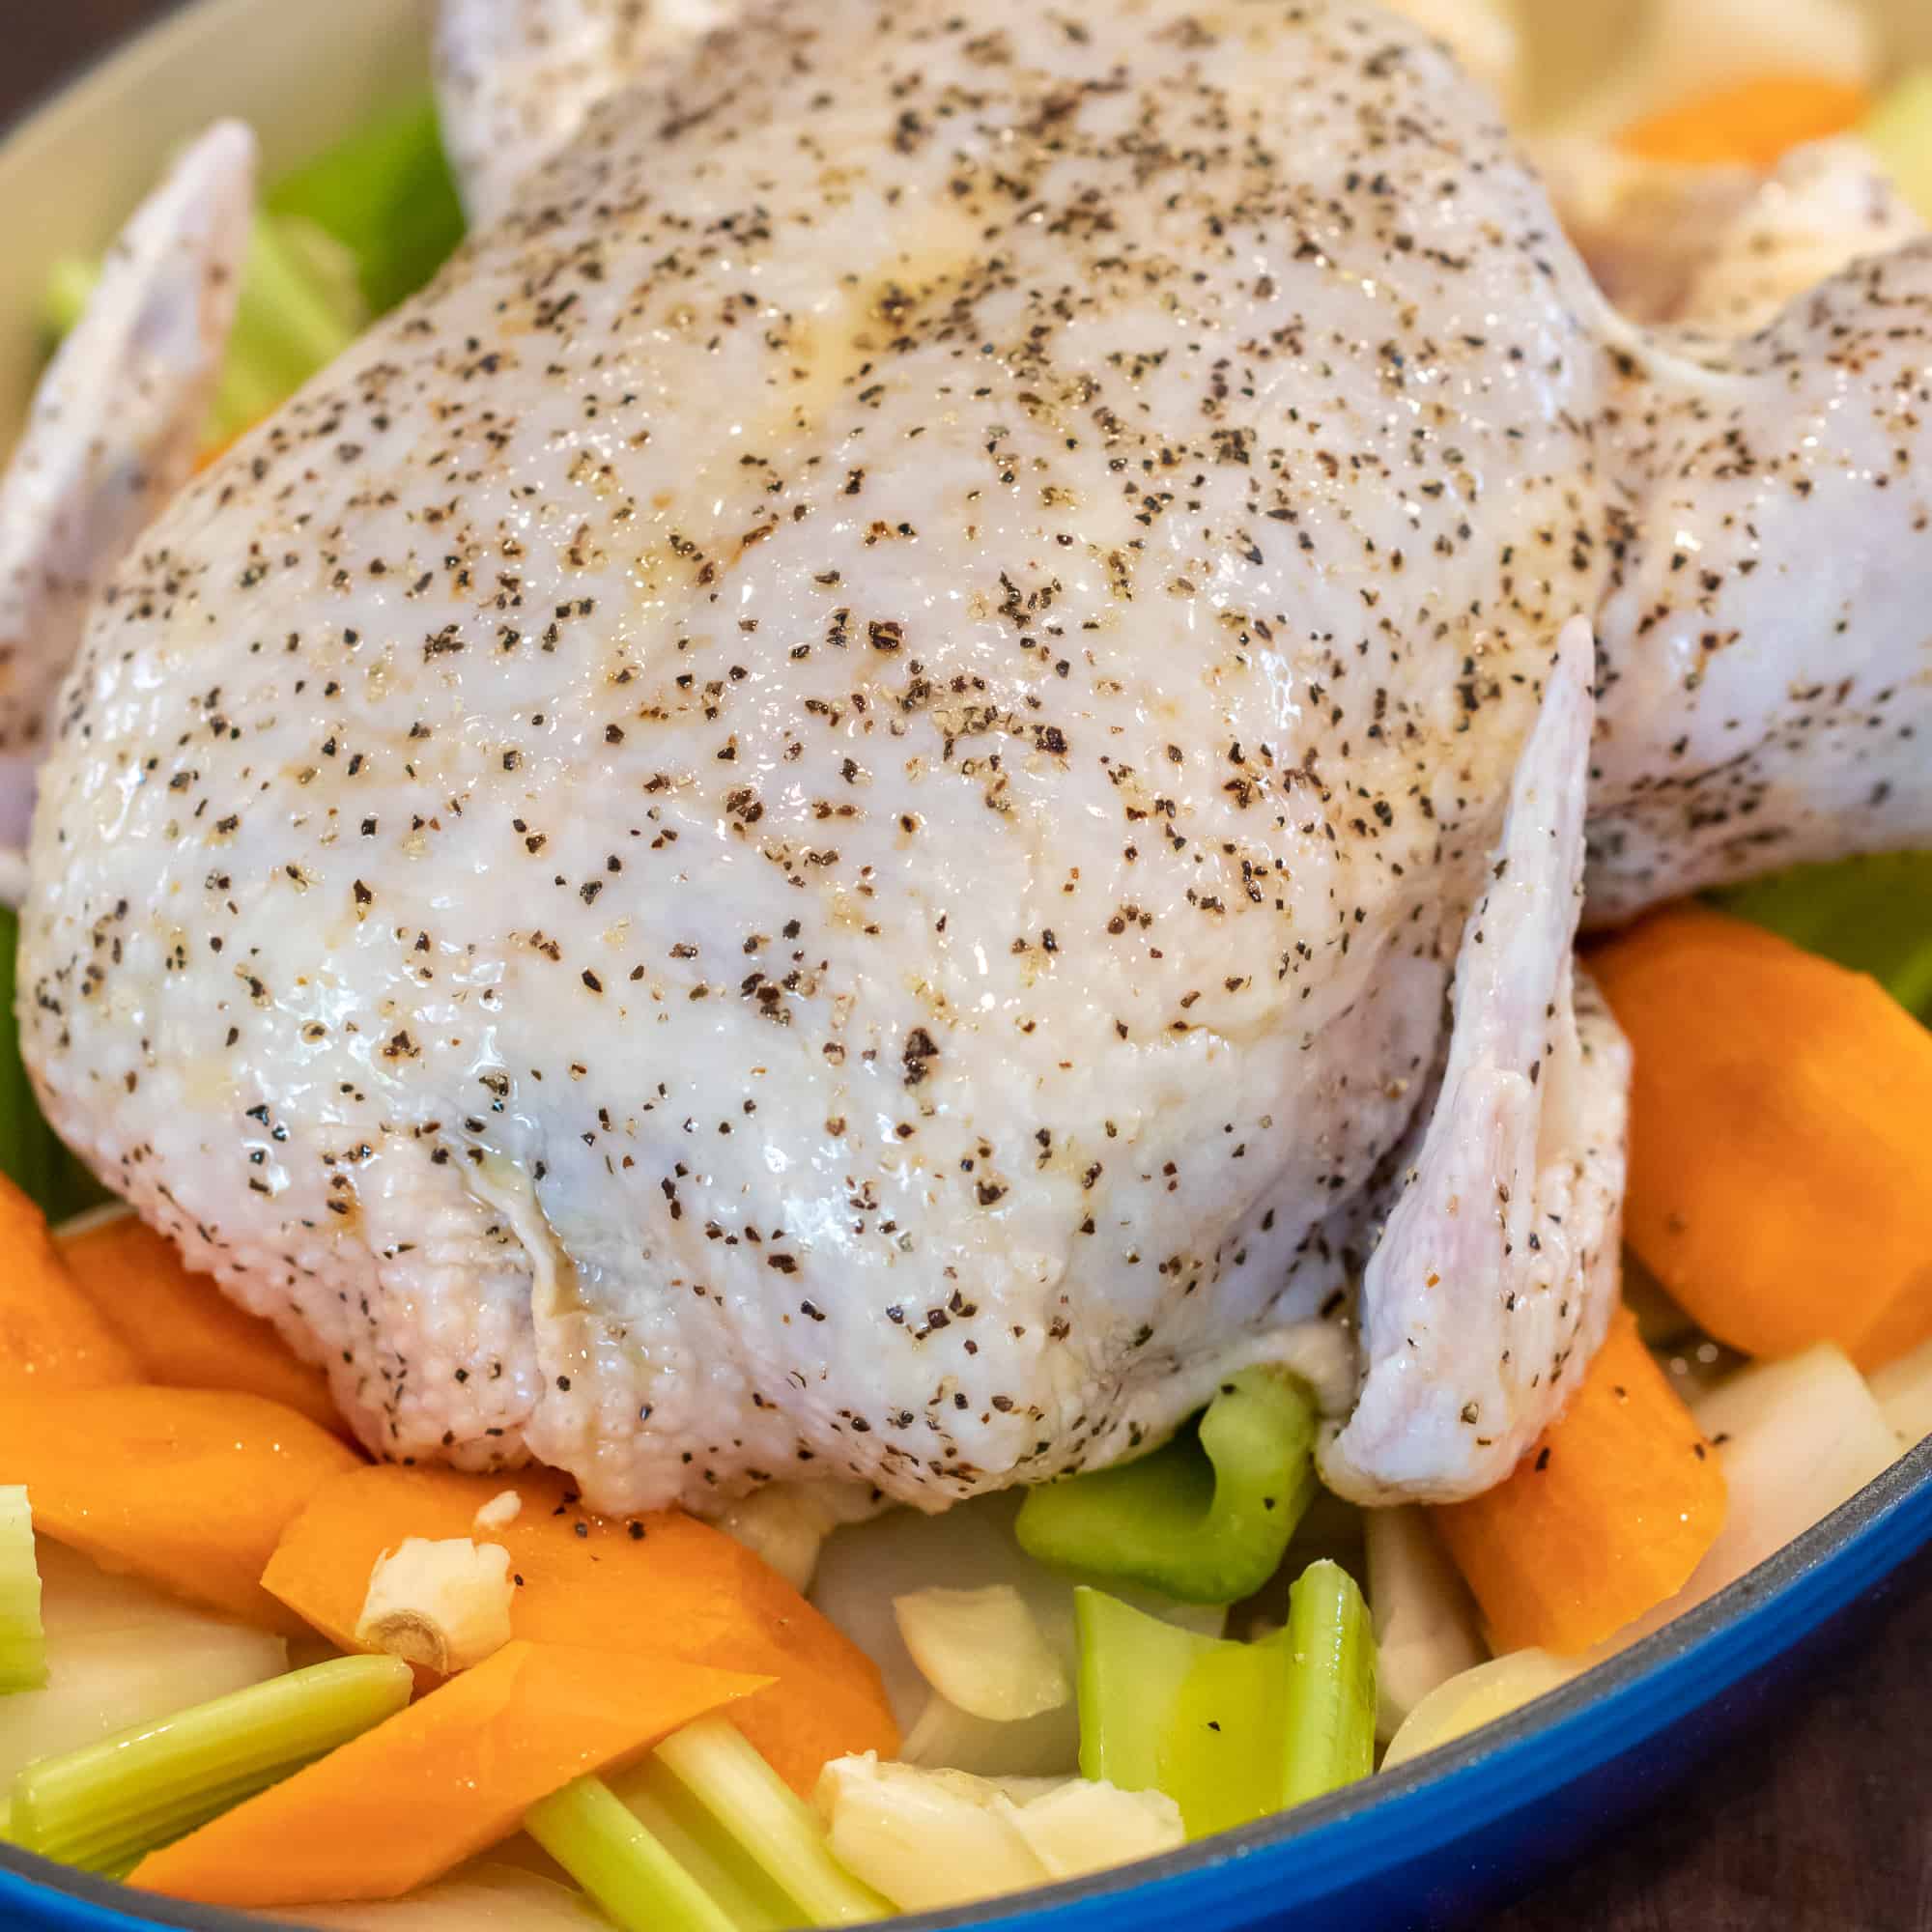 Place the seasoned chicken in a roasting dish on a bed of chopped up vegetables.